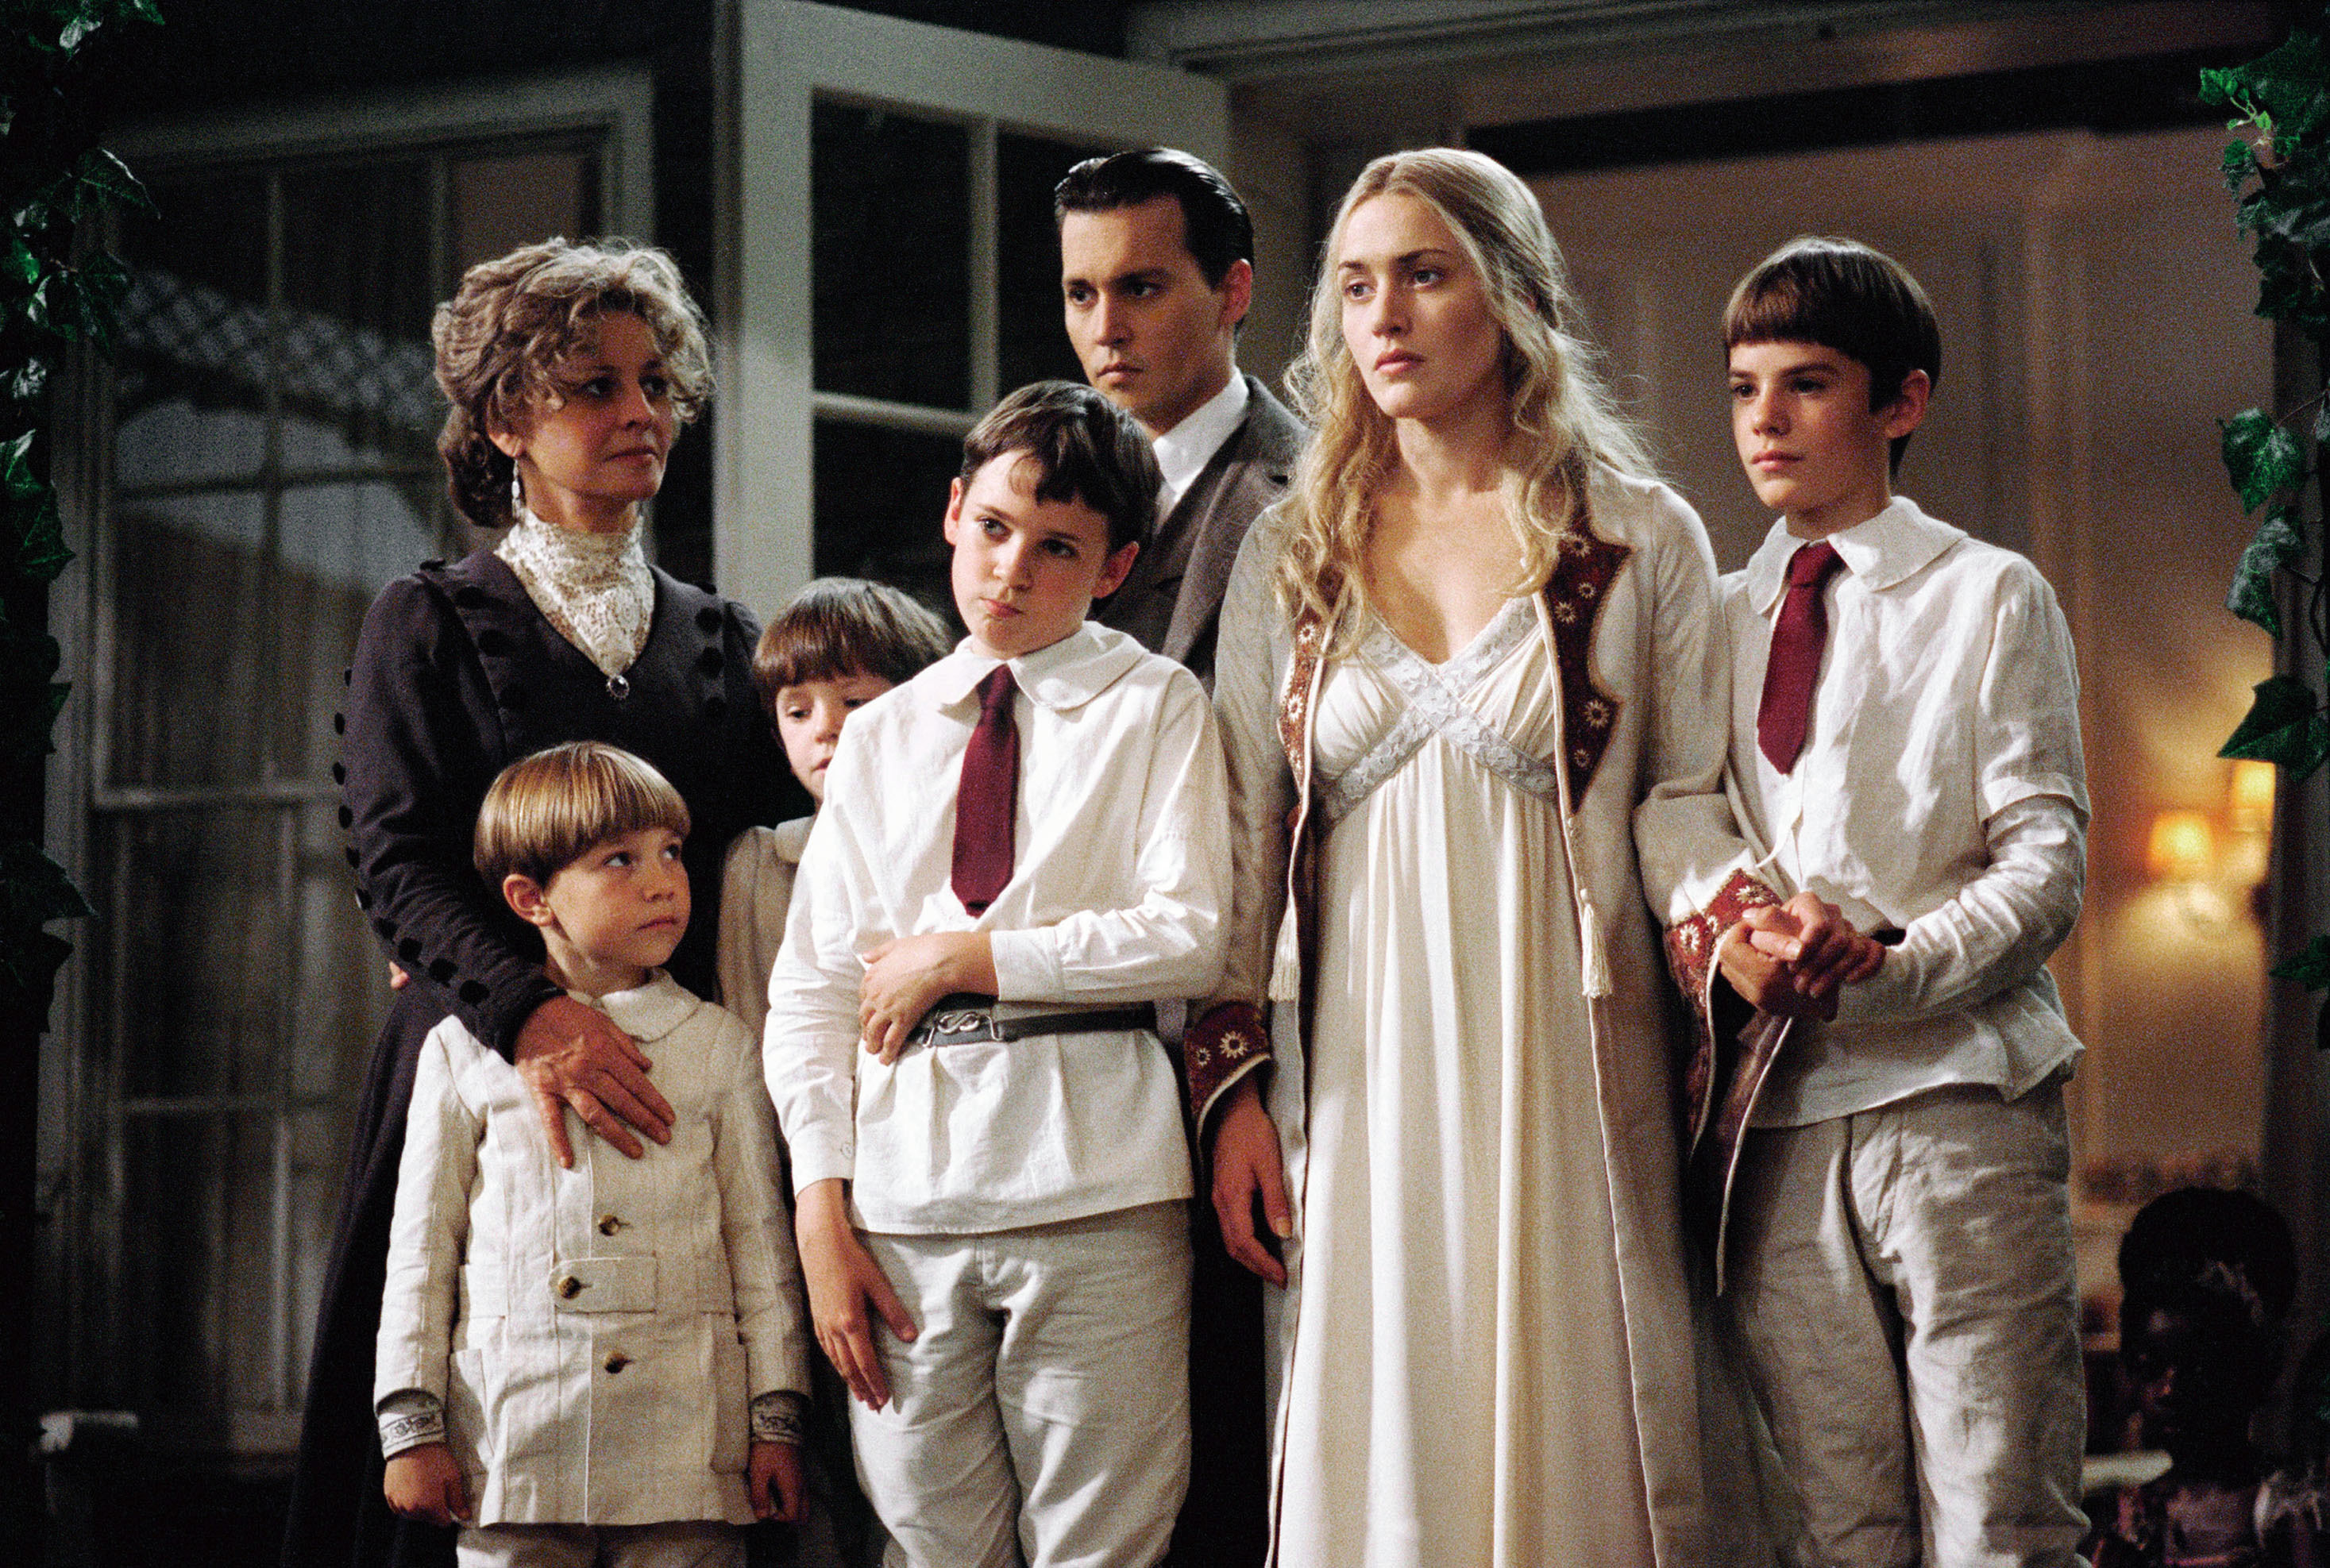 Kate wearing a white gown and standing with Johnny Depp and children